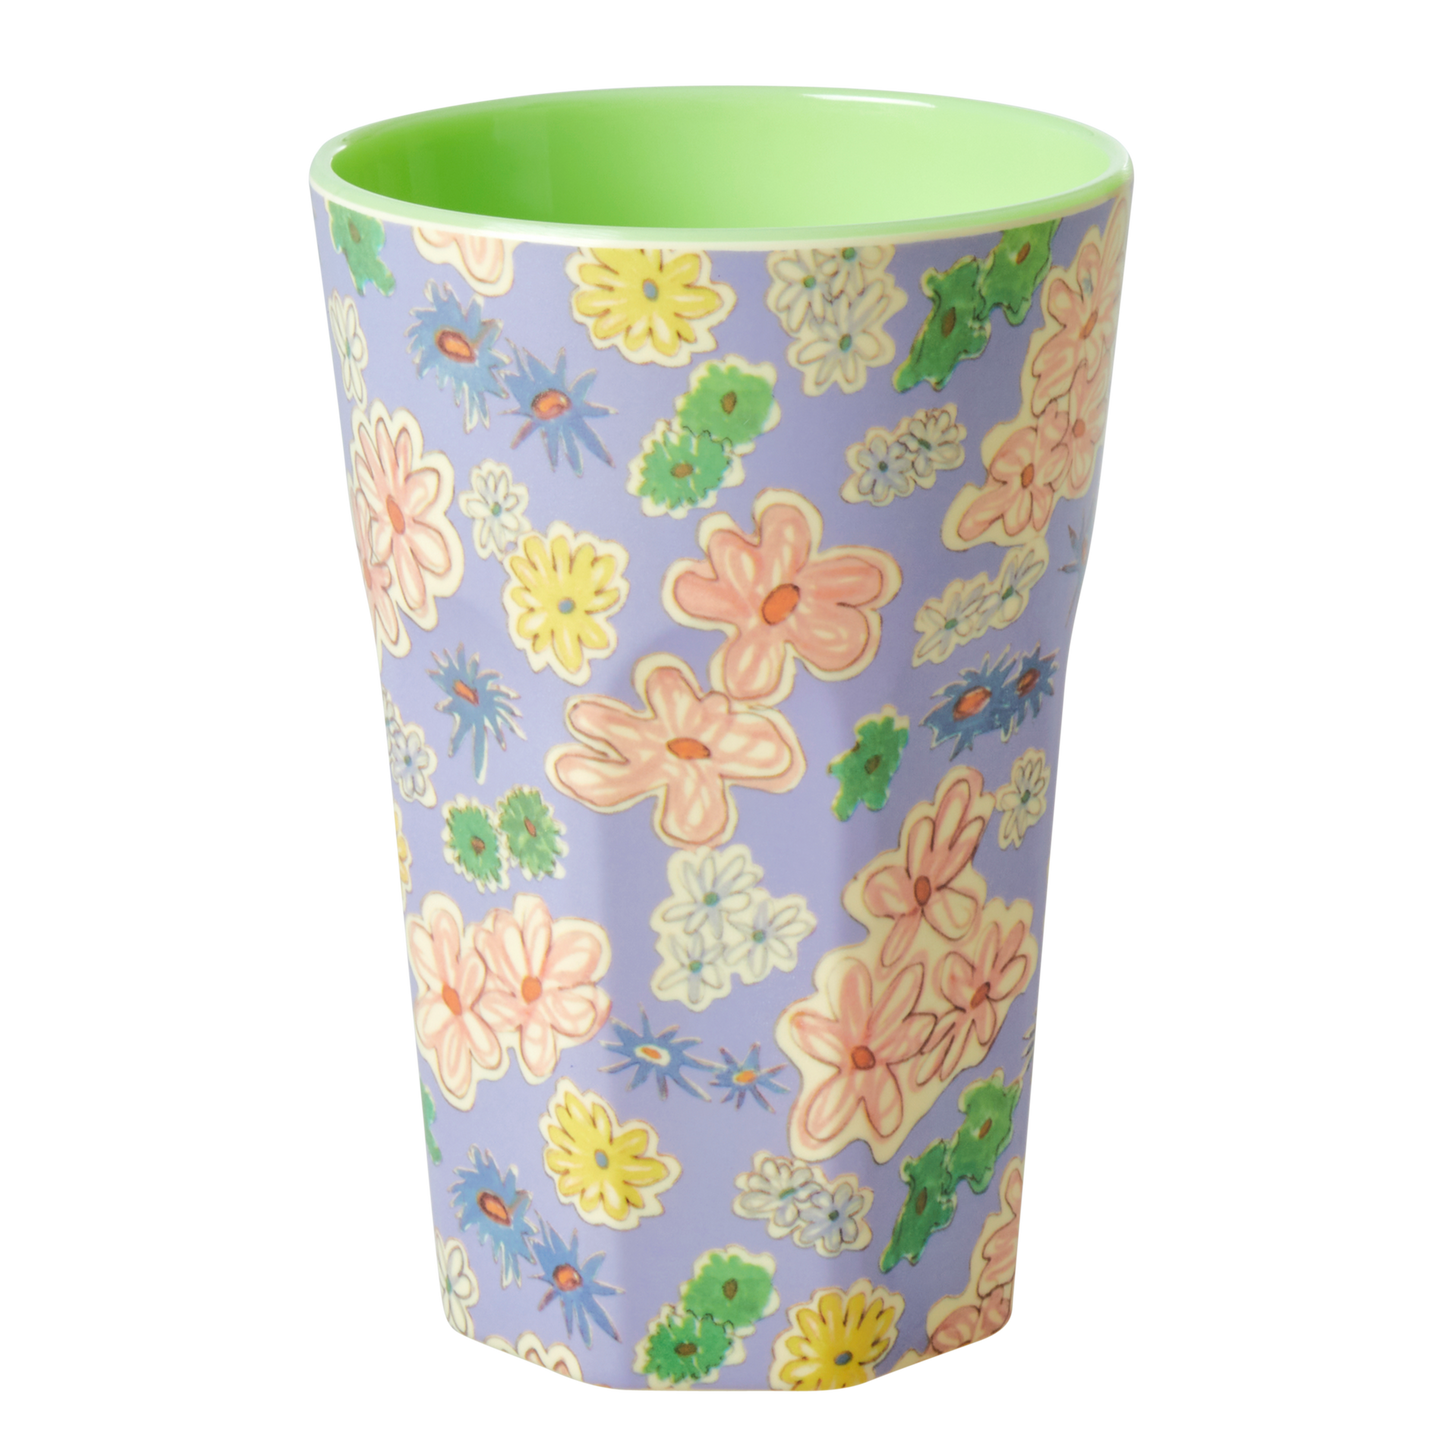 Tall Melamine Cup WITH Flower Paintings Print